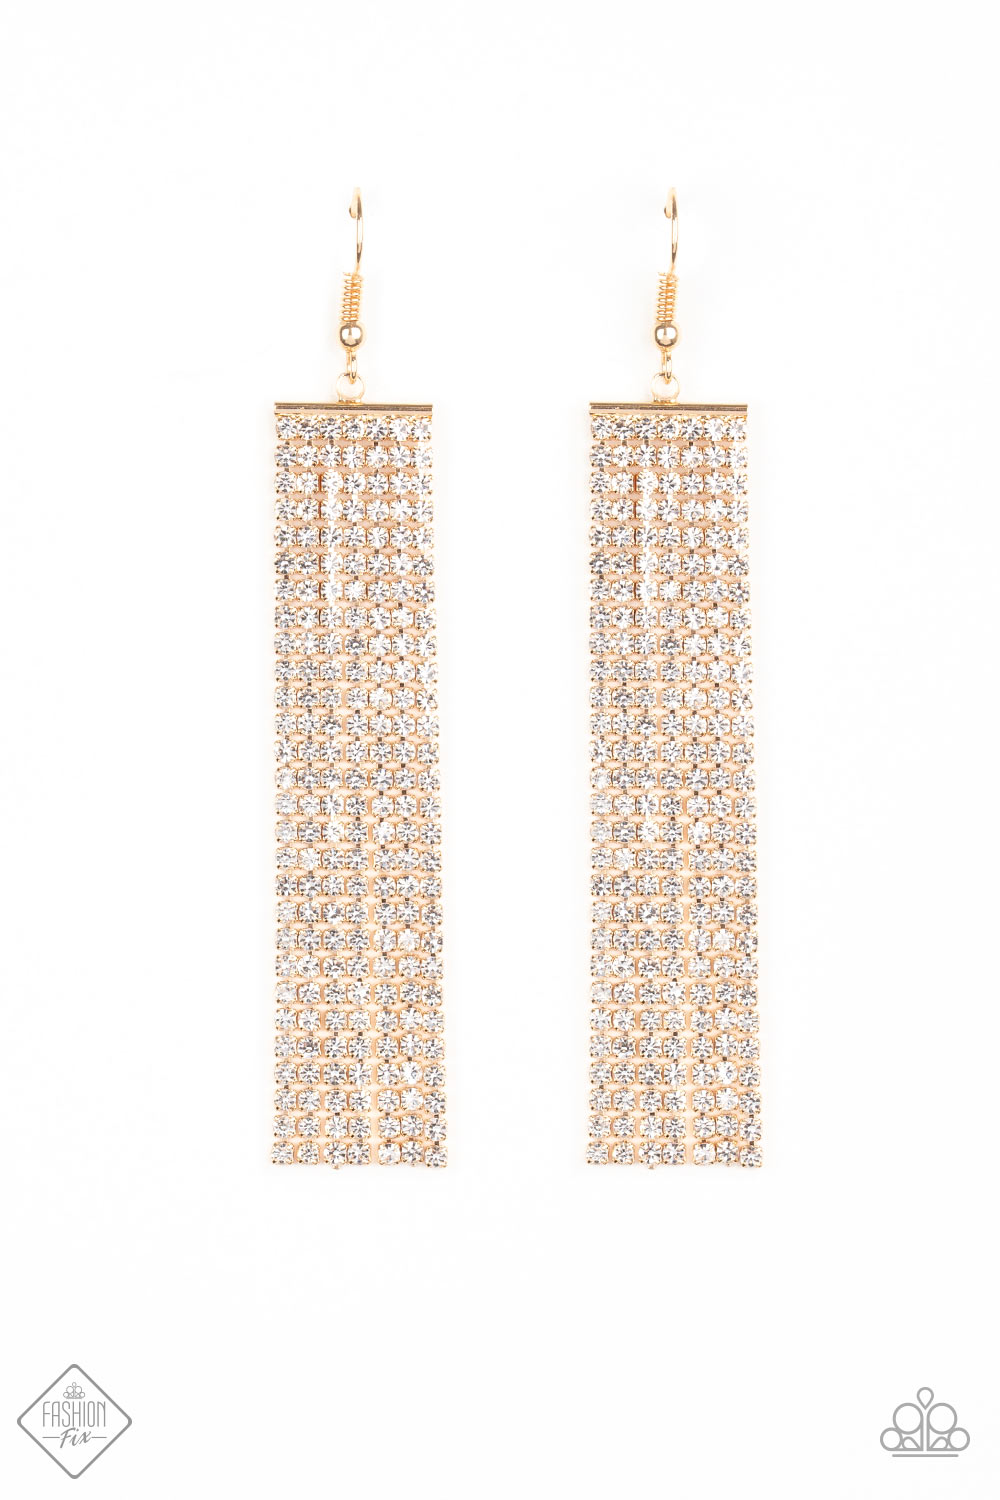 Top-Down Shimmer - Gold Item #E418 Strand after strand of glittery white rhinestones stream from a gold fitting, creating an elegant fringe that falls effortlessly from the ear. Earring attaches to a standard fishhook fitting. All Paparazzi Accessories are lead free and nickel free!  Sold as one pair of earrings.